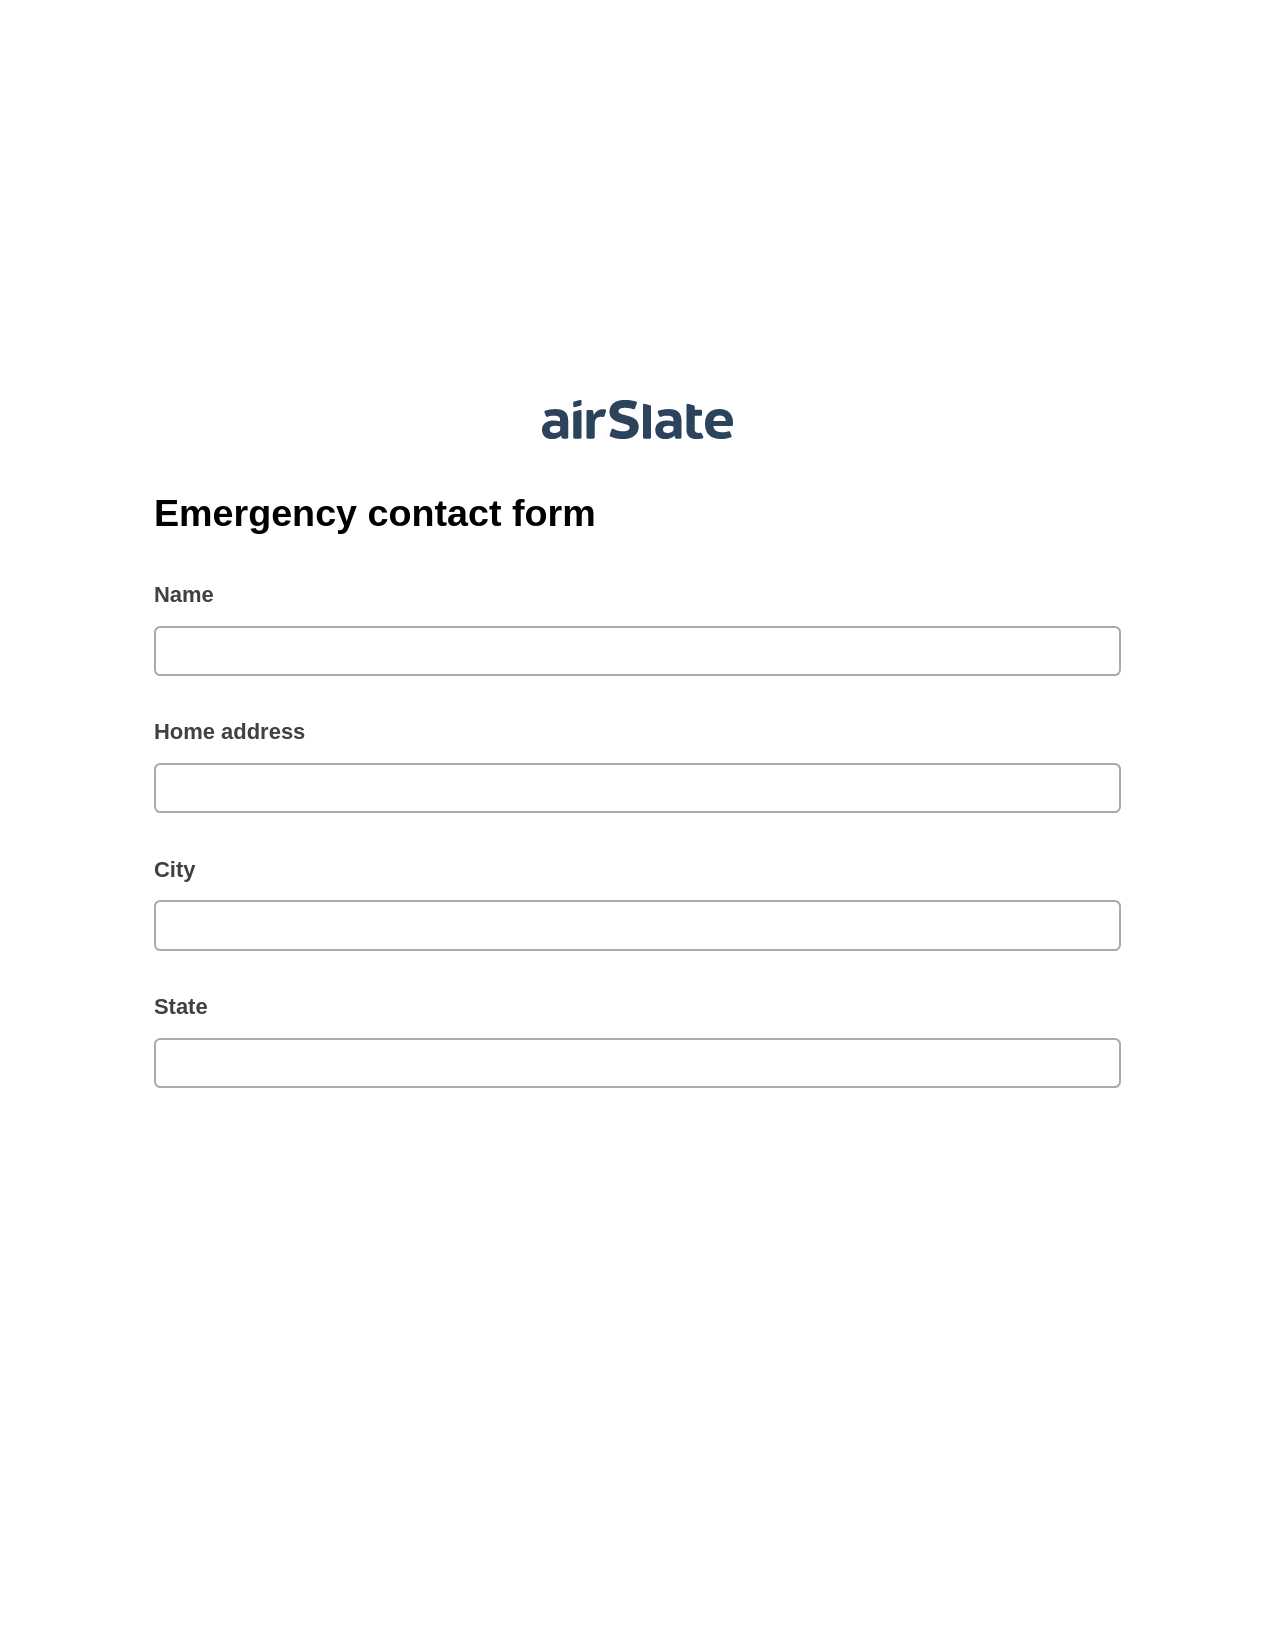 Emergency contact form Pre-fill Document Bot, Unassign Role Bot, Text Message Notification Postfinish Bot